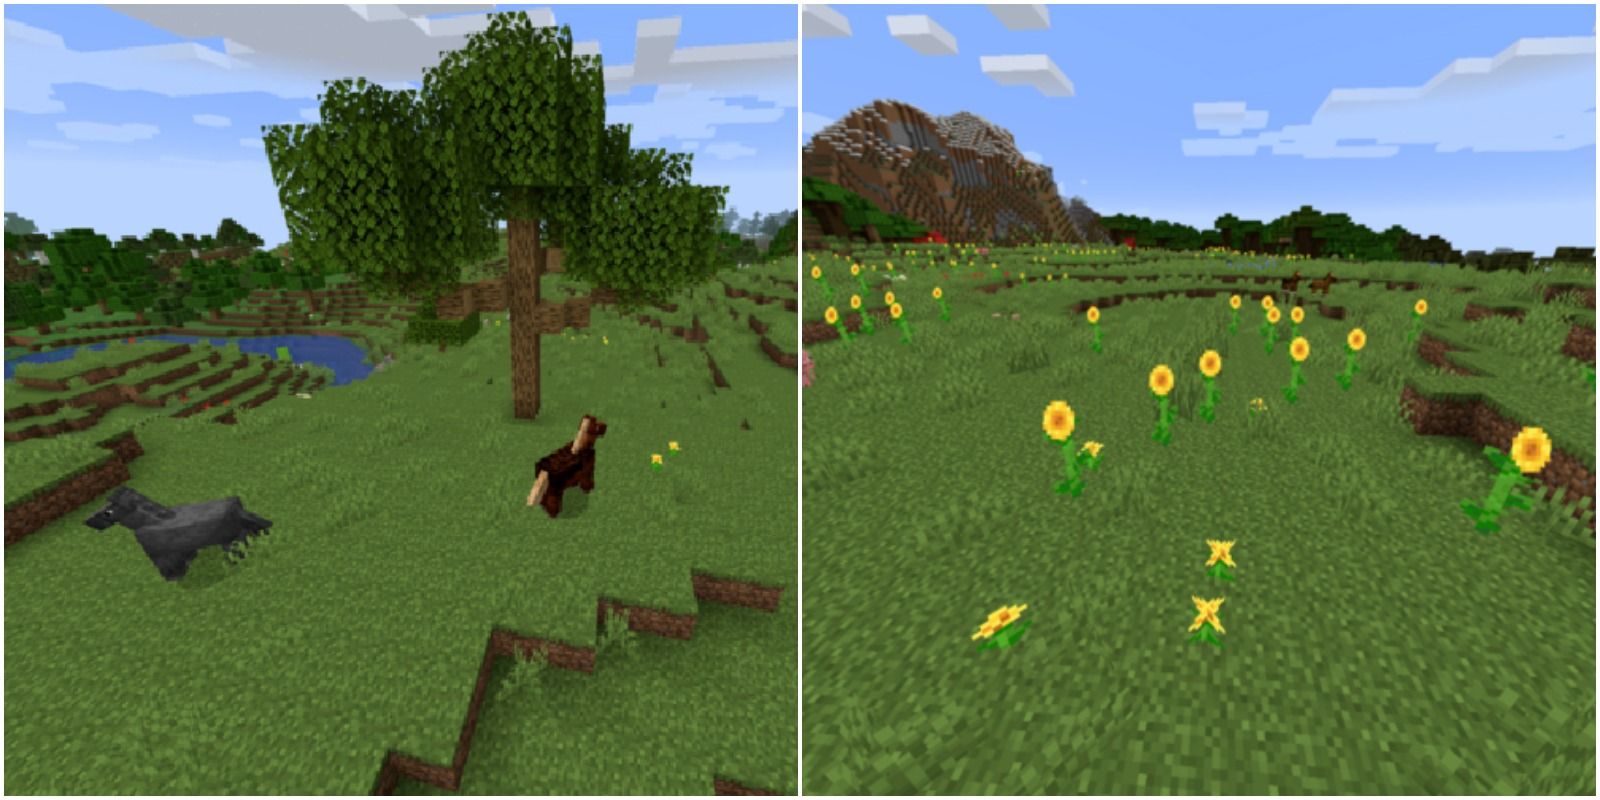 plains with horses, oak trees, and sunflowers.